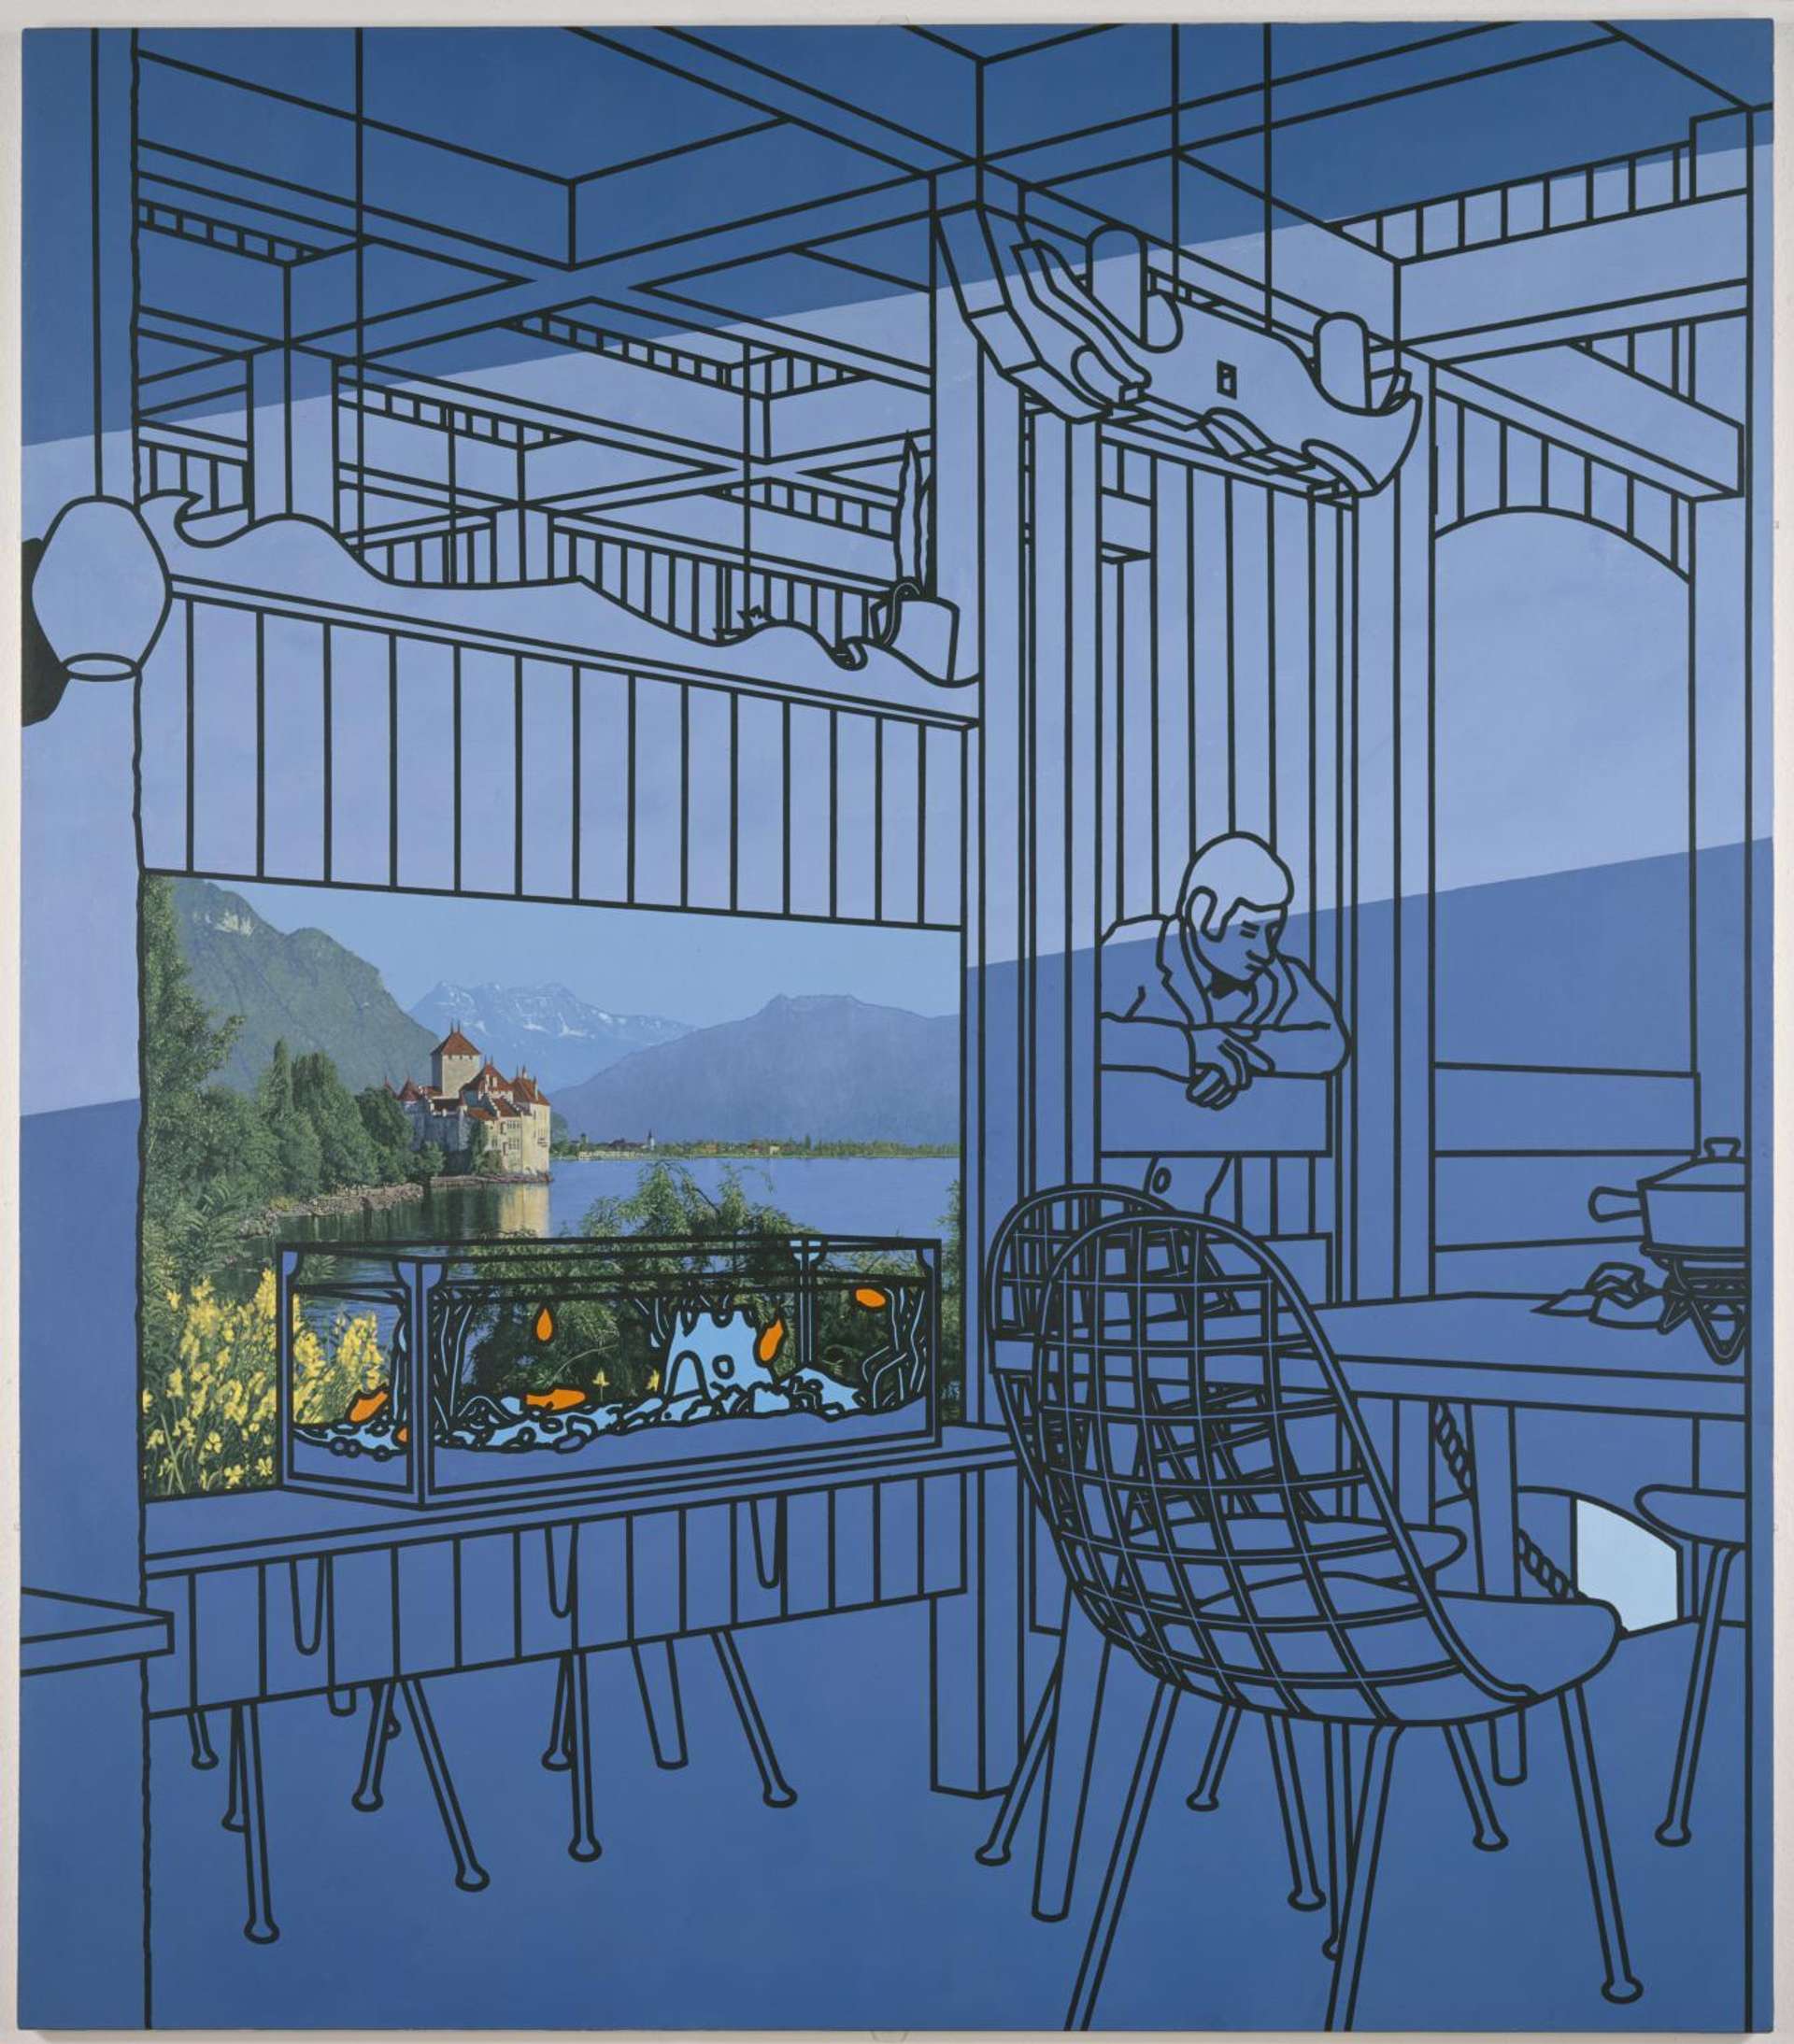 Patrick Caulfield's artwork "After Lunch" features a blue restaurant scene outlined with black lines. In the left corner, a hyperrealistic château overlooking a lake stands out against the flat foreground of the restaurant.